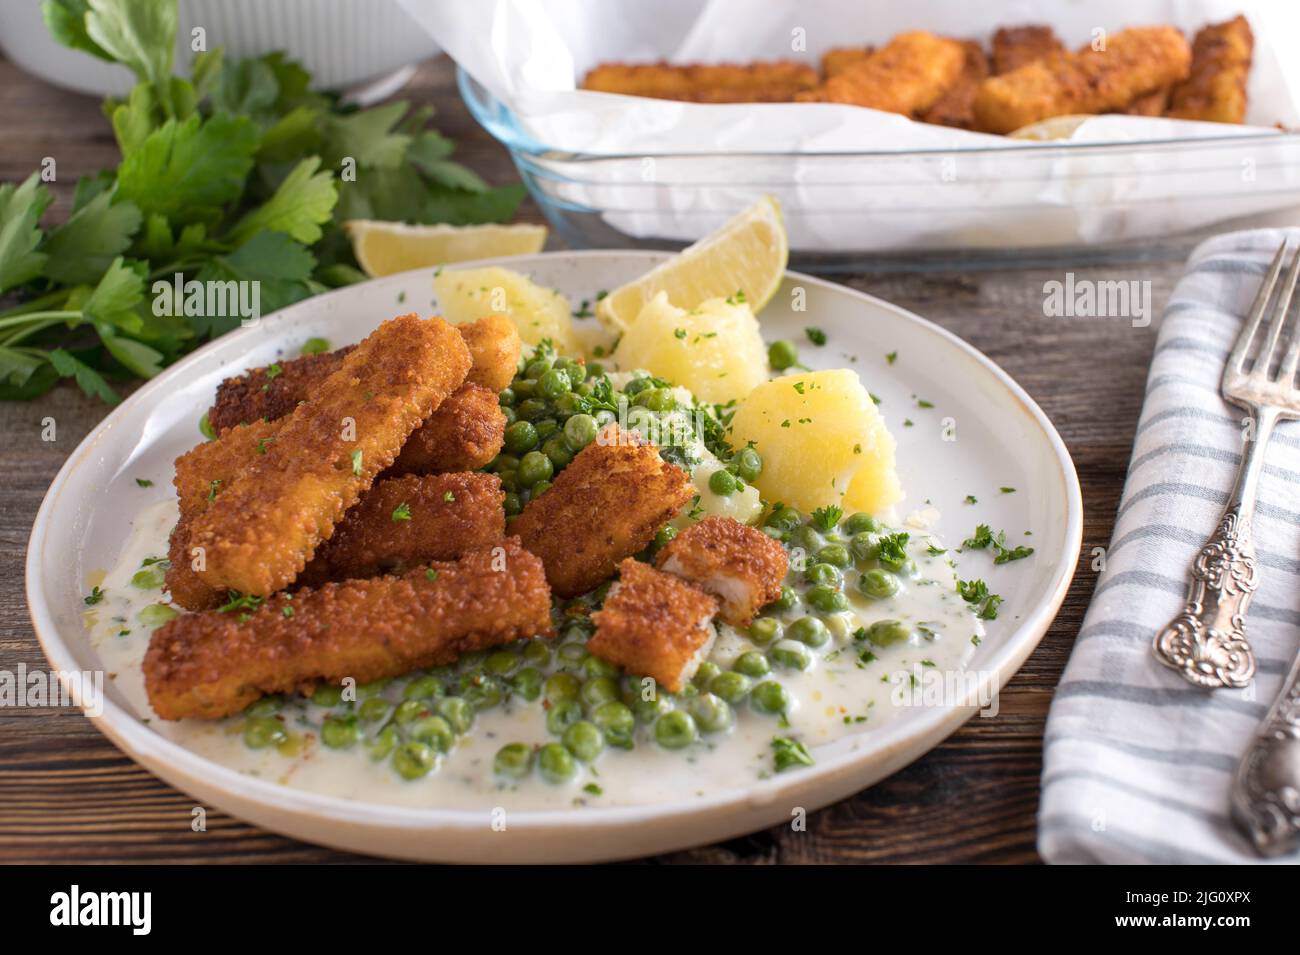 Fish sticks with green peas, boiled potatoes and bechamel sauce. Served on a white plate on wooden table Stock Photo